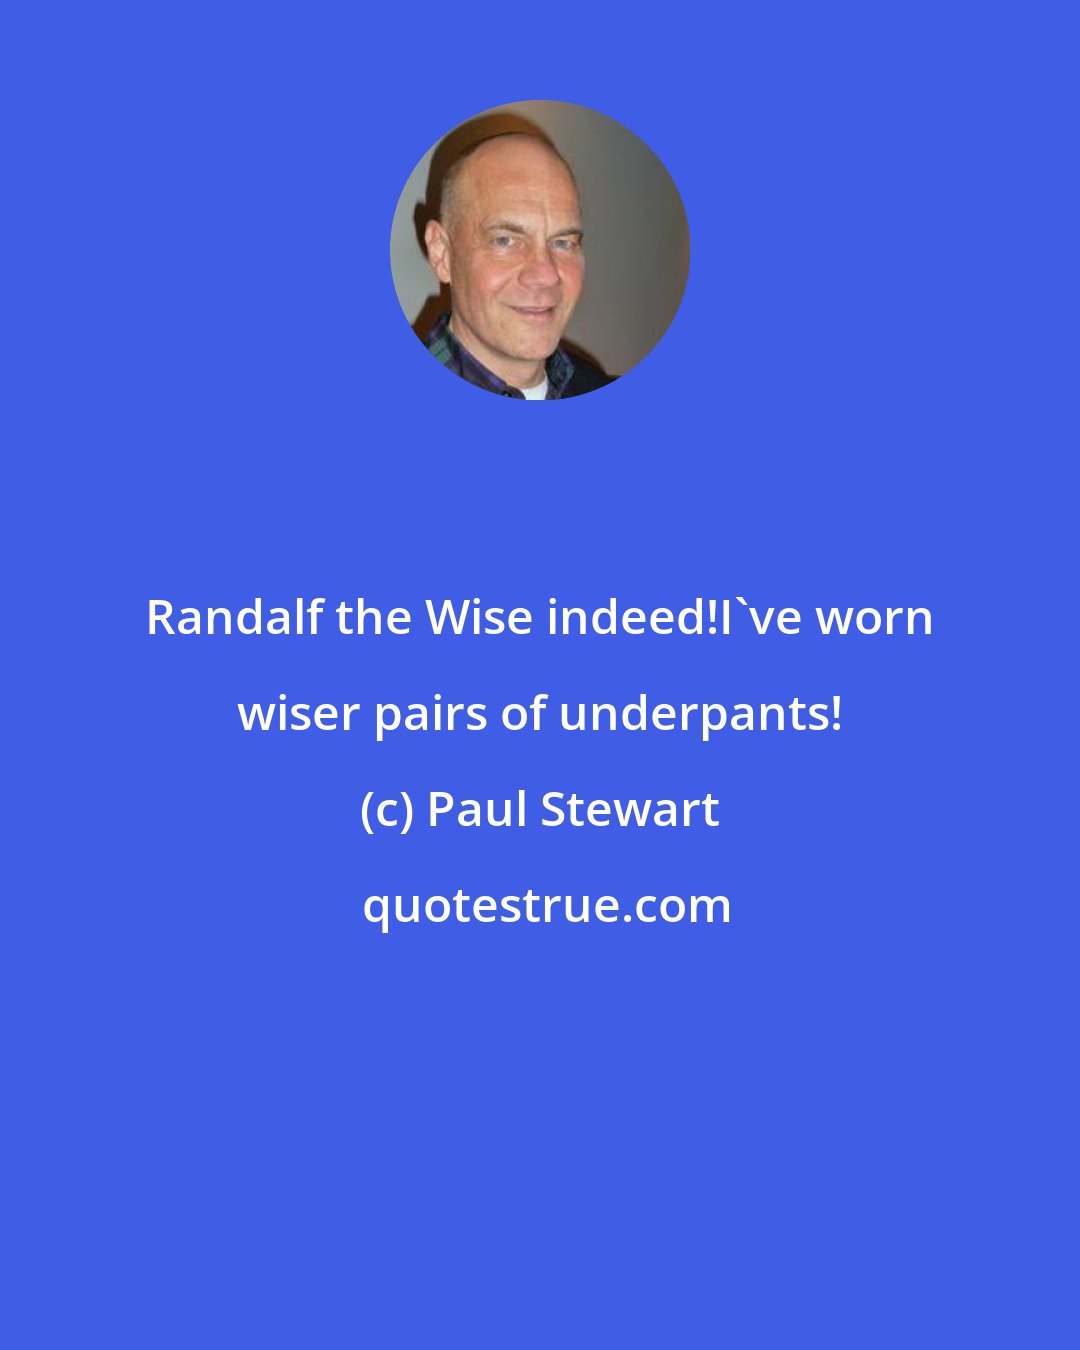 Paul Stewart: Randalf the Wise indeed!I've worn wiser pairs of underpants!